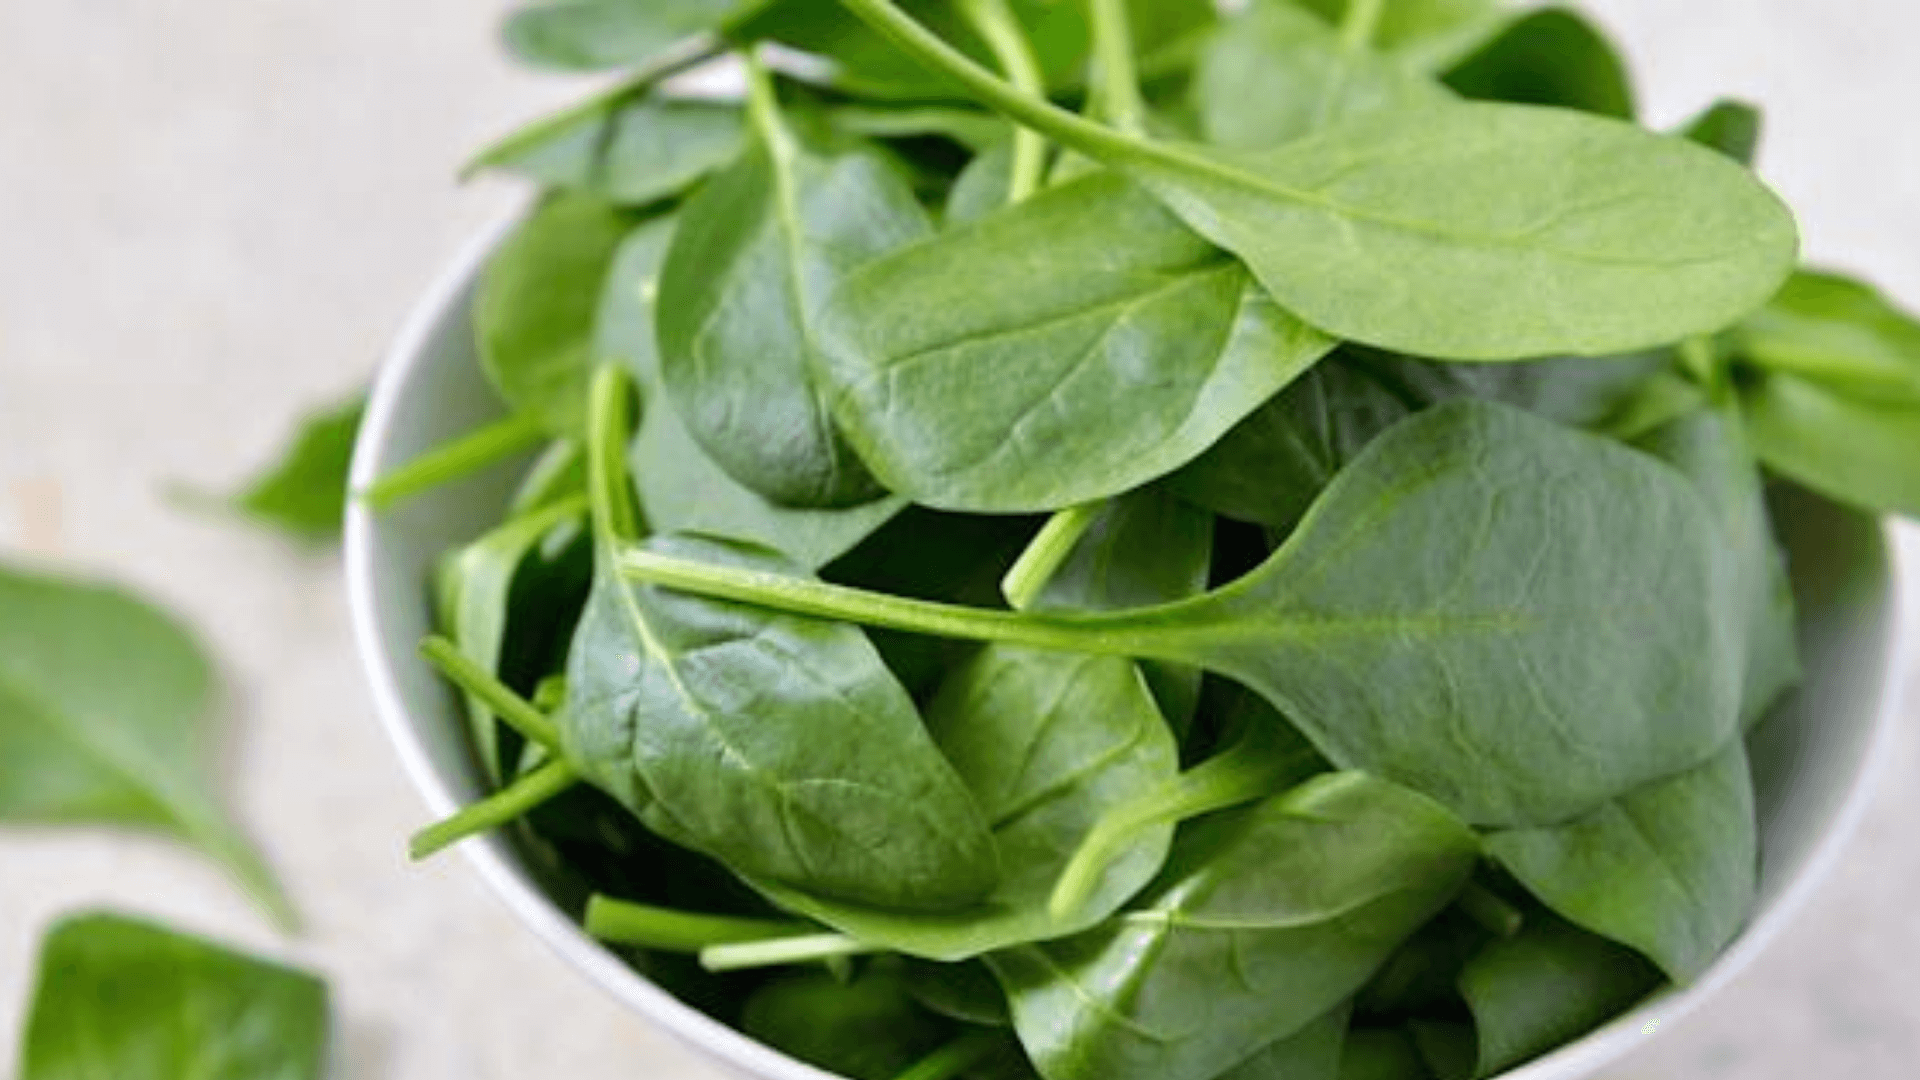 CDC-Issues-Warning-About-E.-Coli-Outbreak-Related-To-Baby-Spinach-1